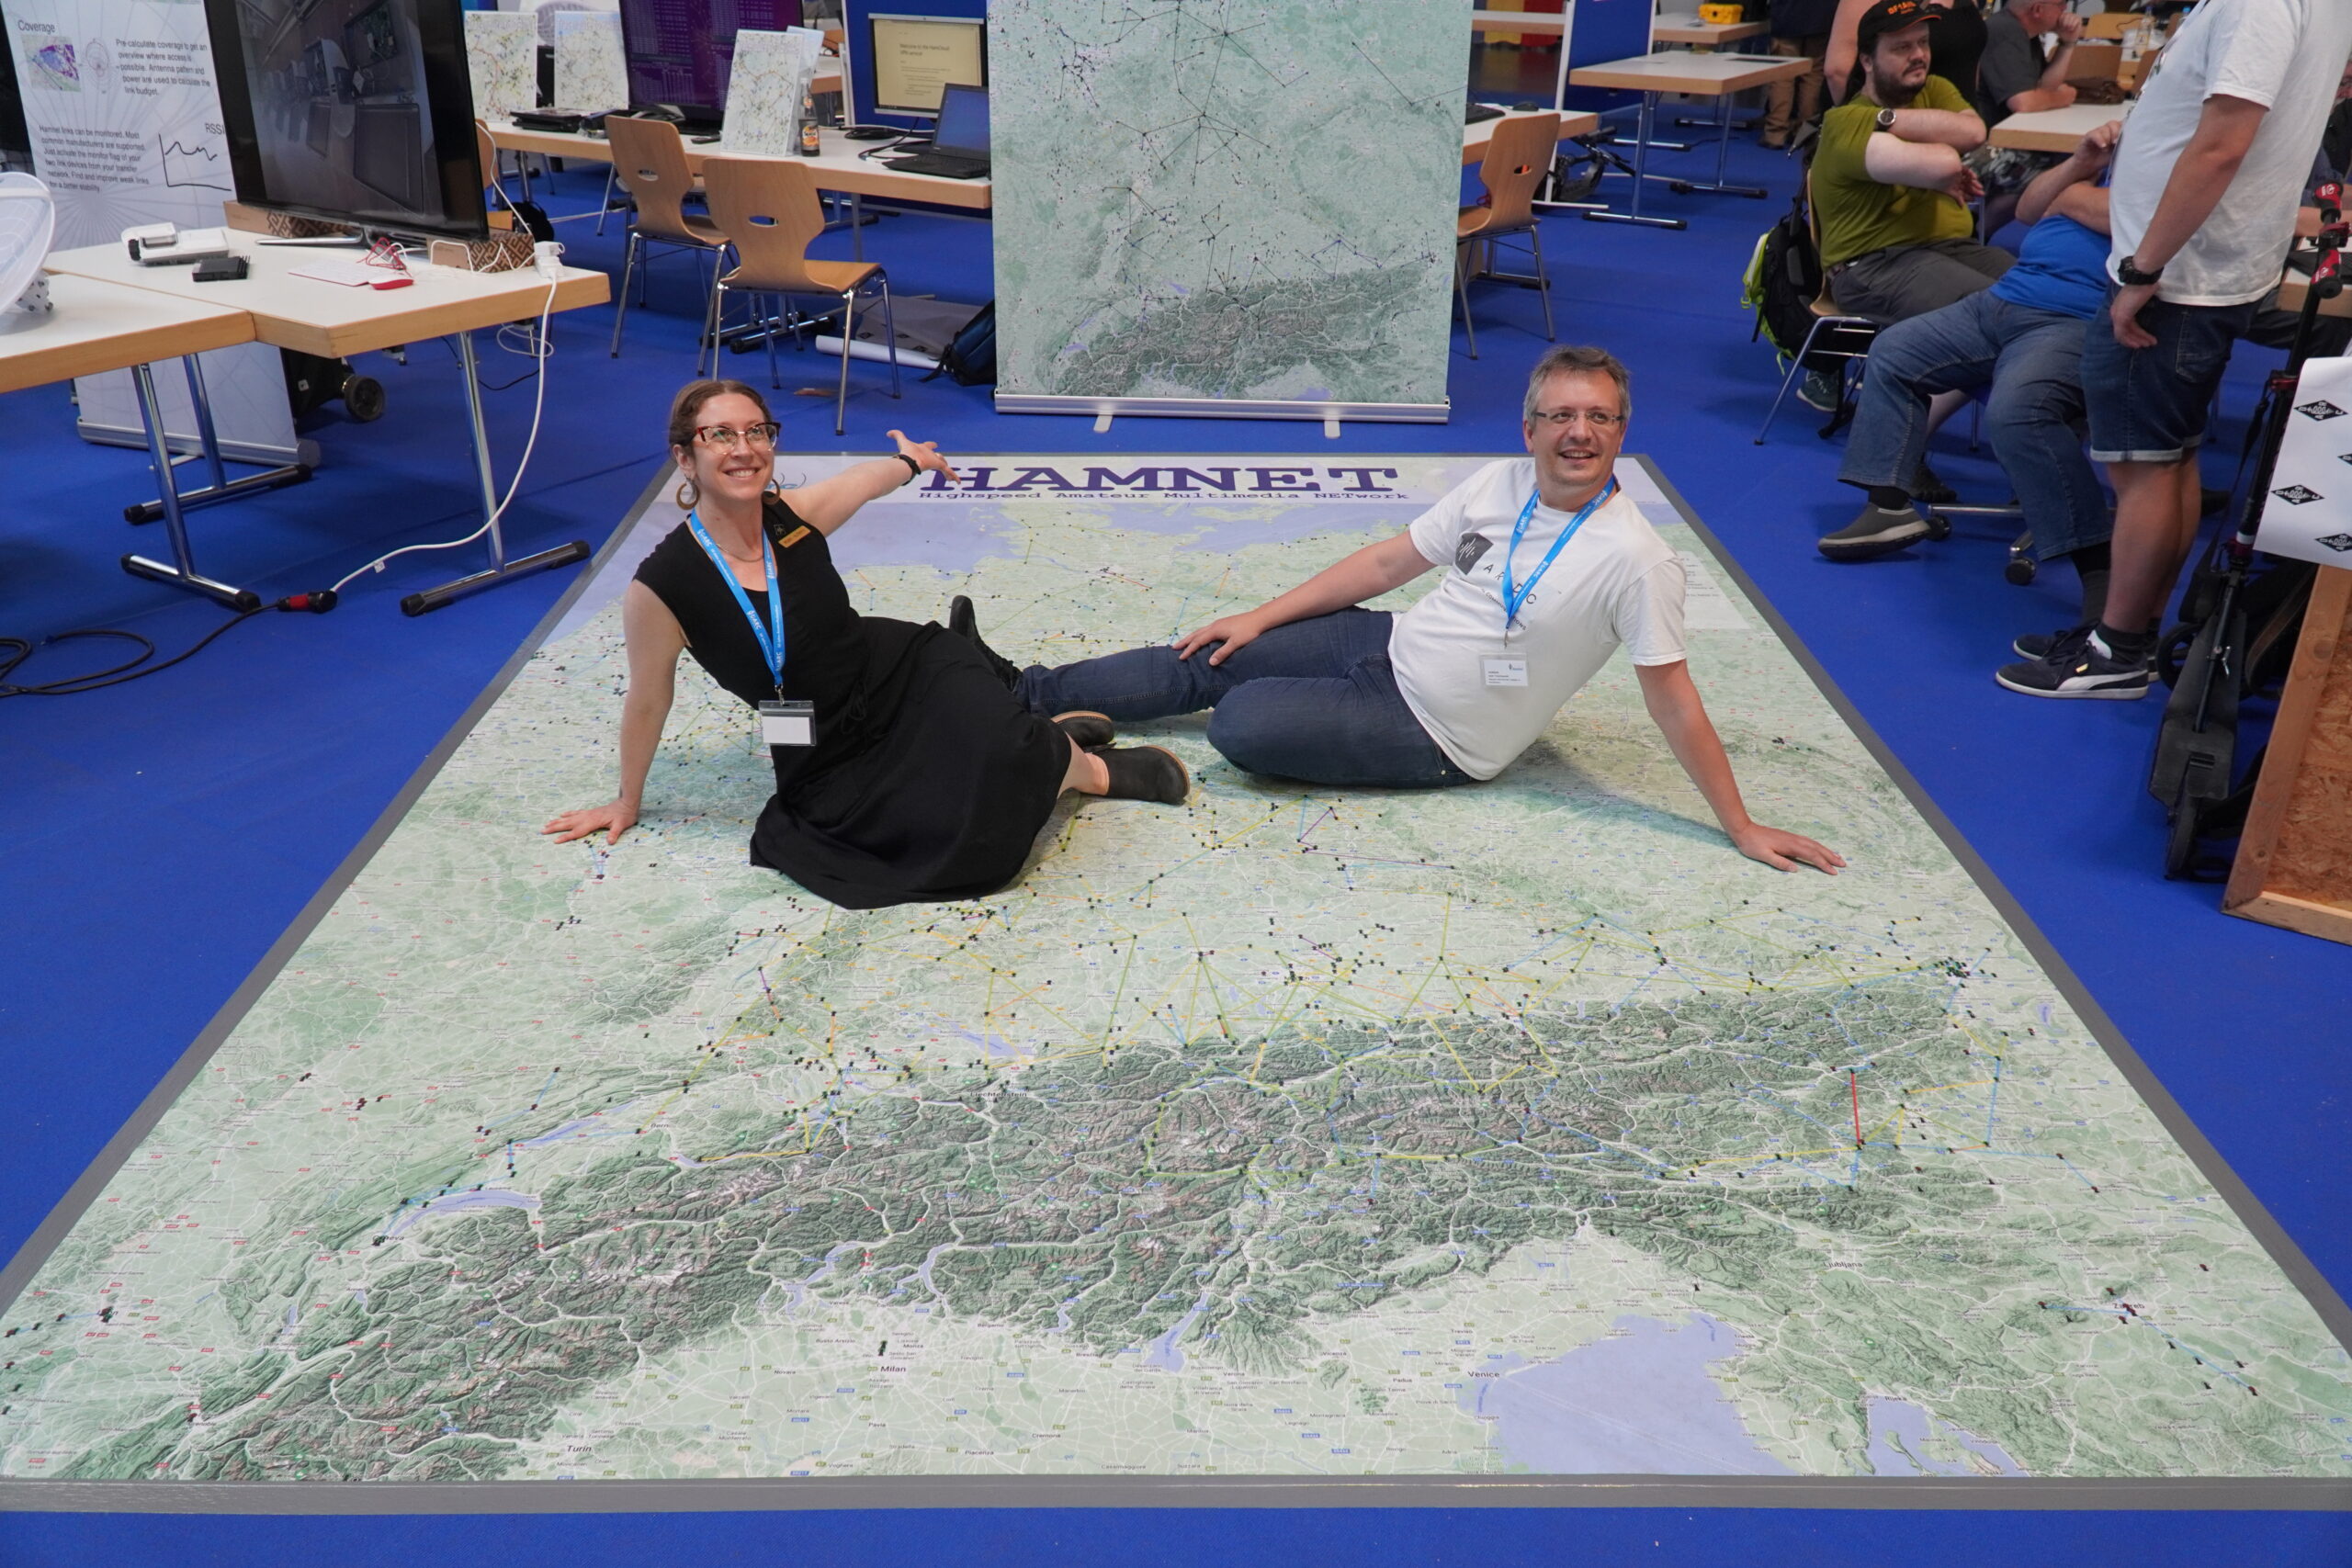 Rosy Schechter (KJ7RYV) with Jann Traschewski (DG8NGN) on a floor map of HAMNET, currently the largest network utilizing 44Net